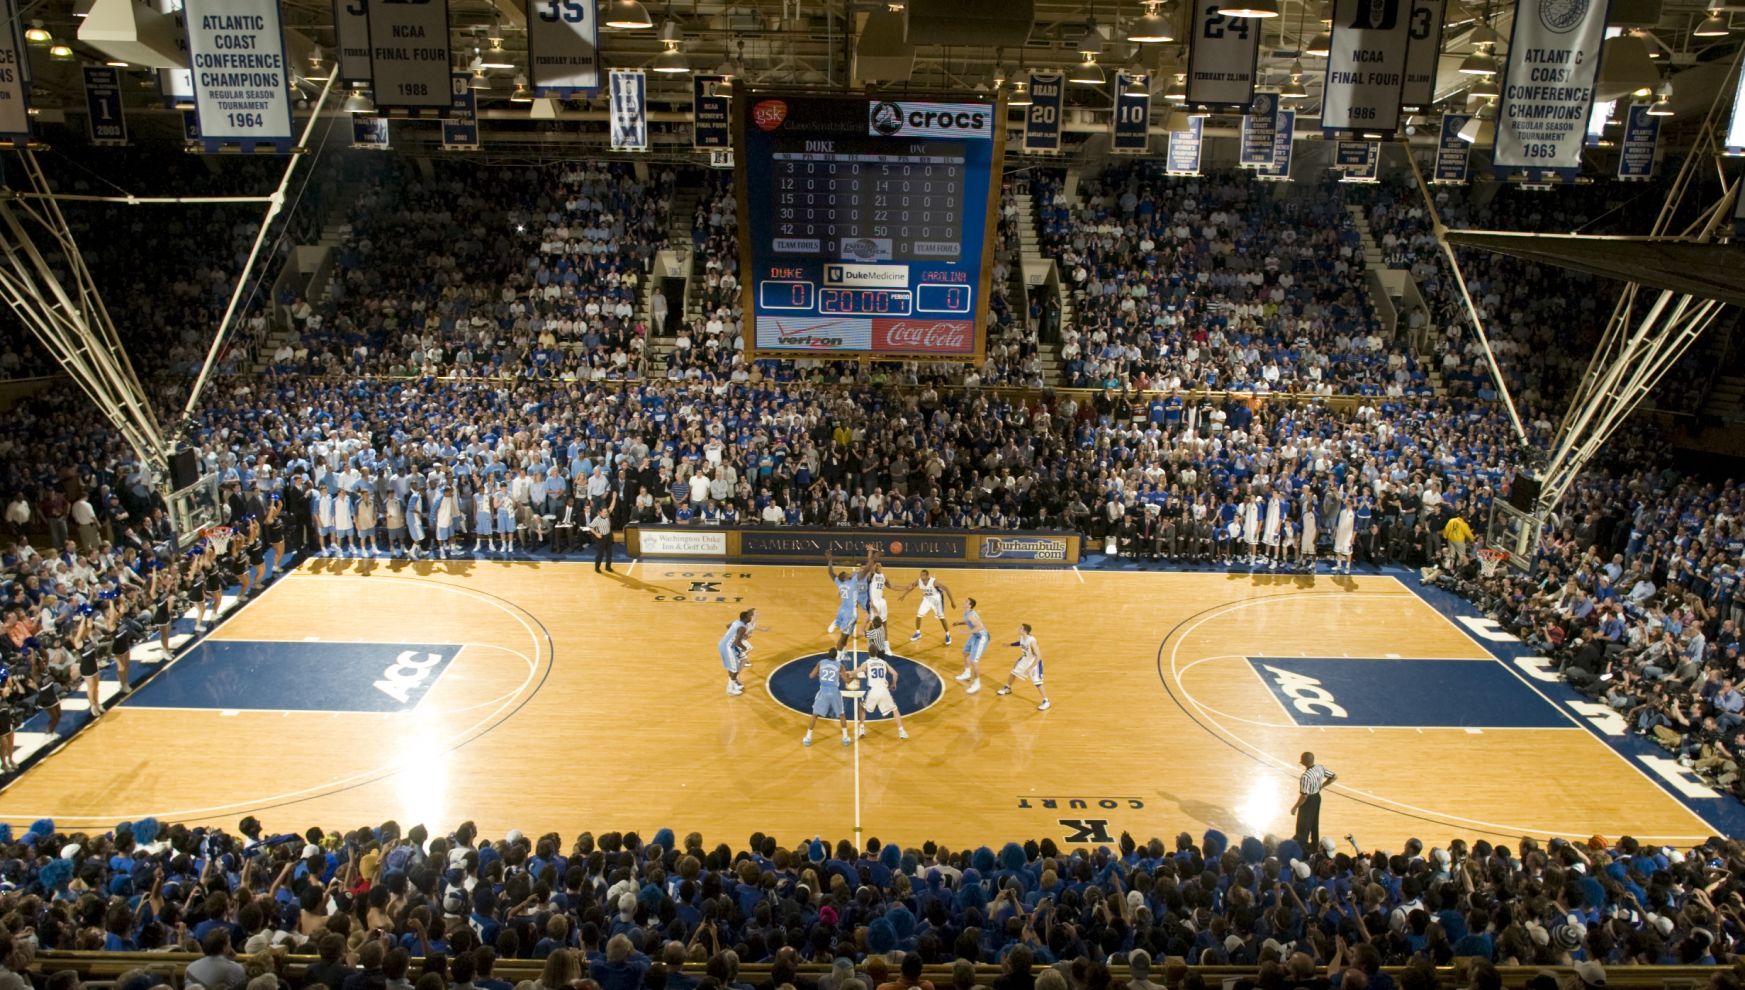 A Basketball Game In A Stadium